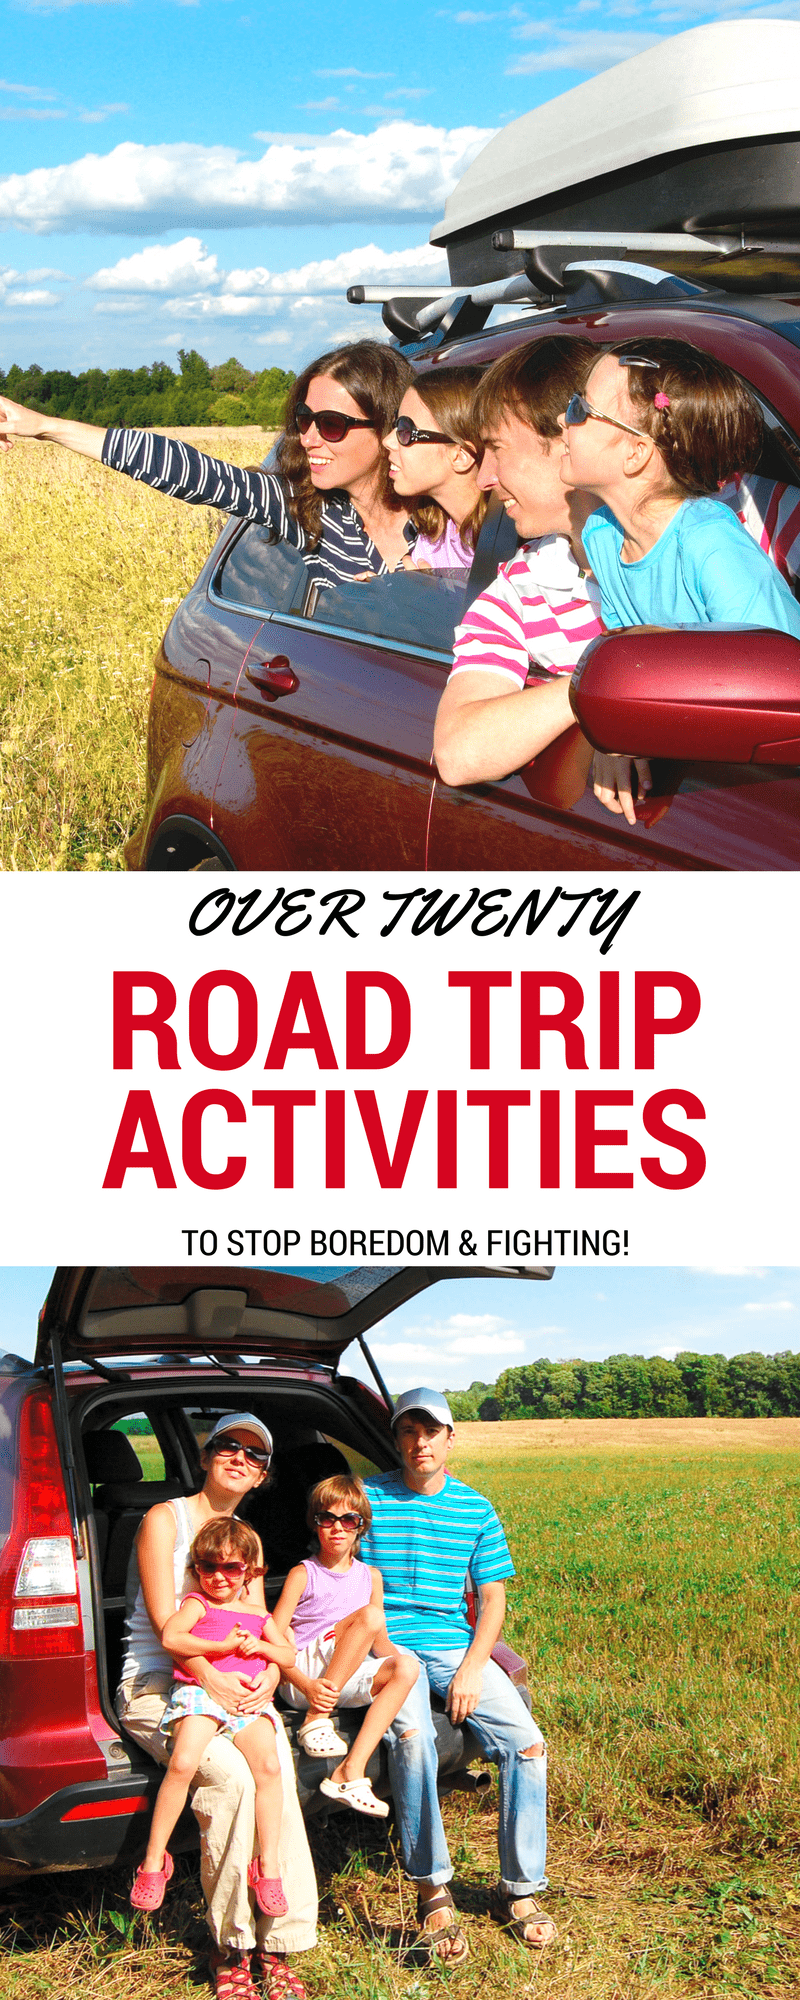 Over 20 Fun Road Trip Ideas for Kids! – 3 Boys and a Dog